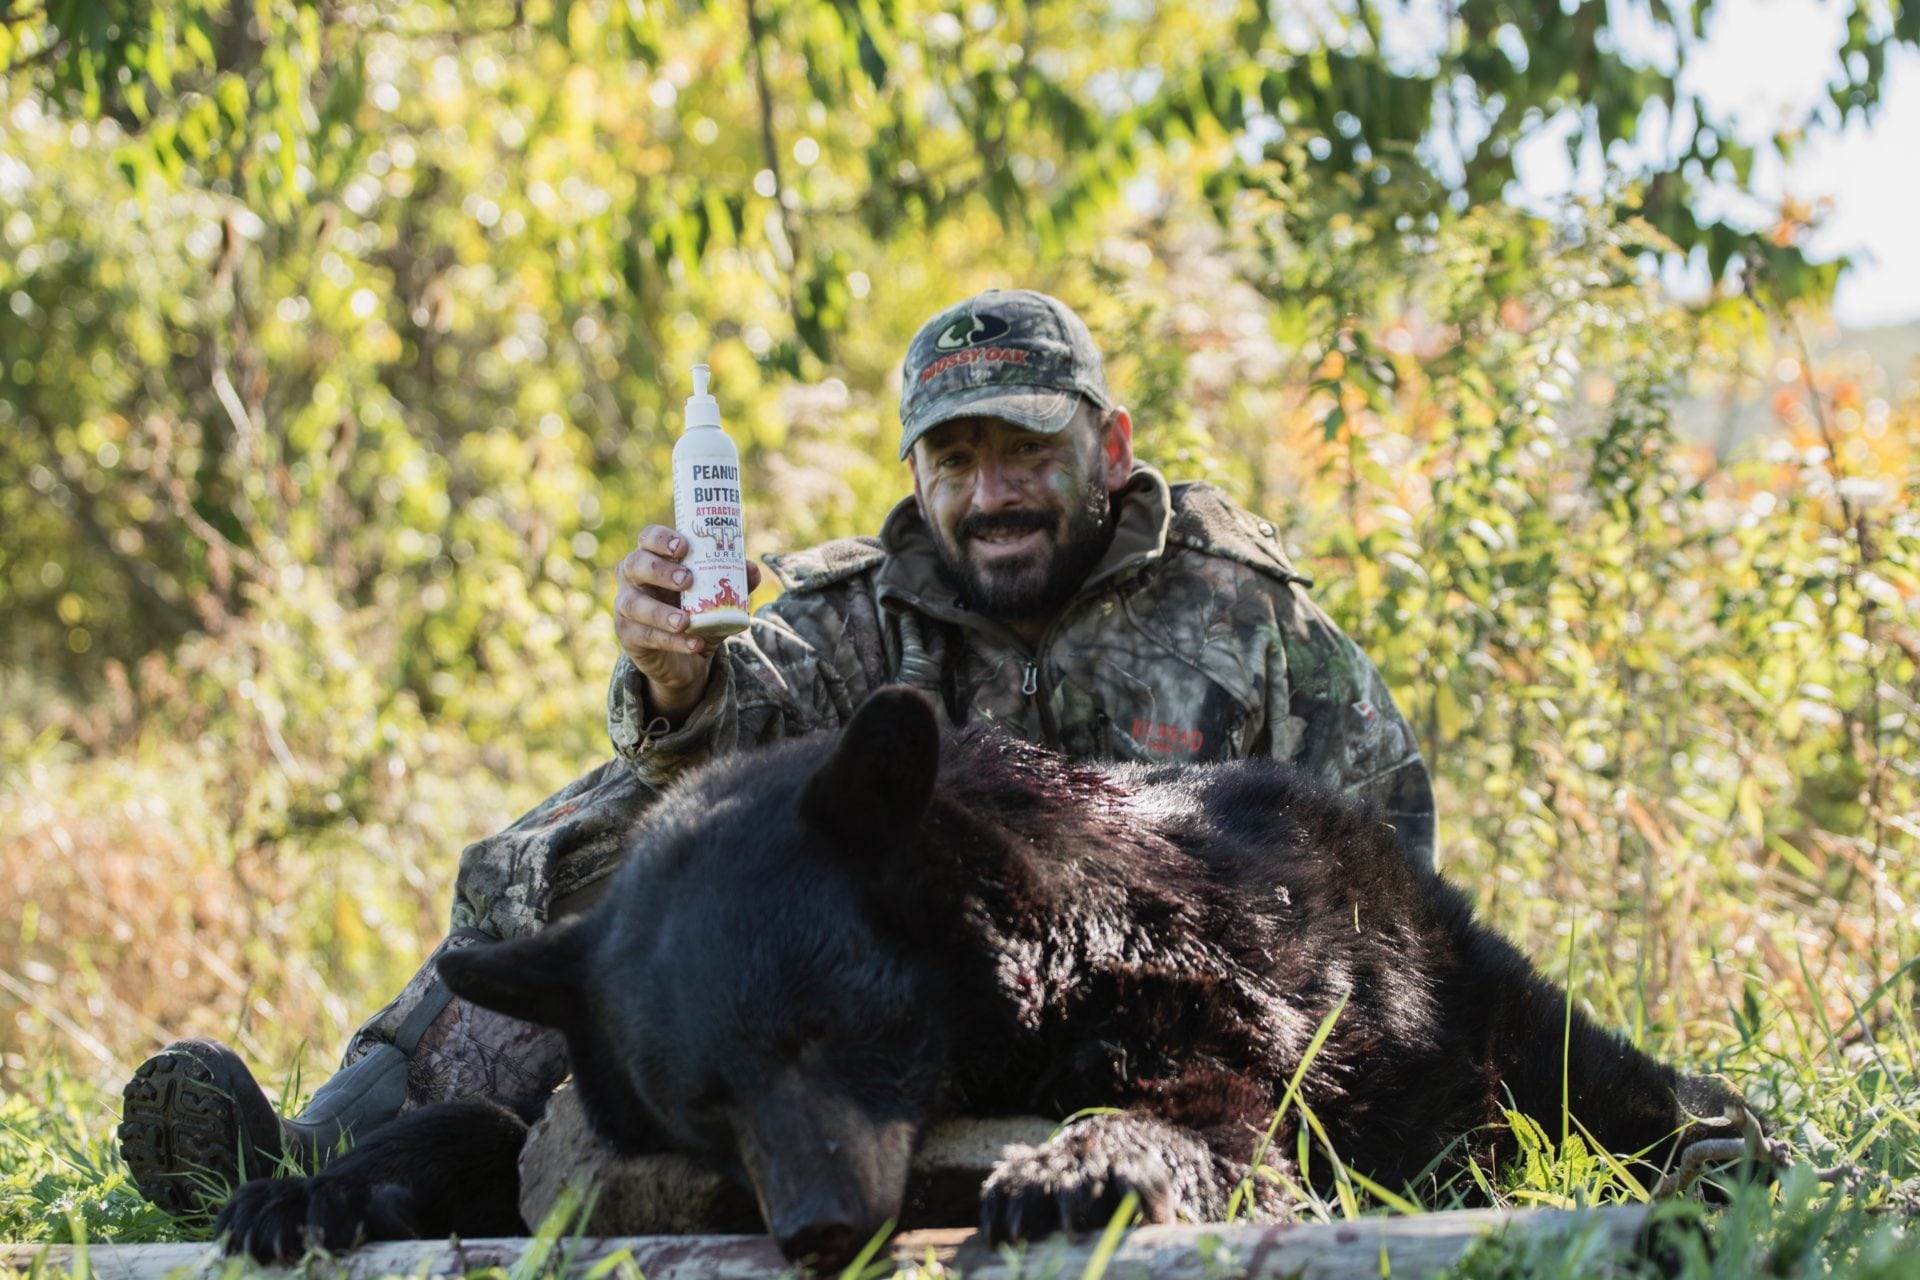 A man in camouflage holding a knife and sitting next to a bear.